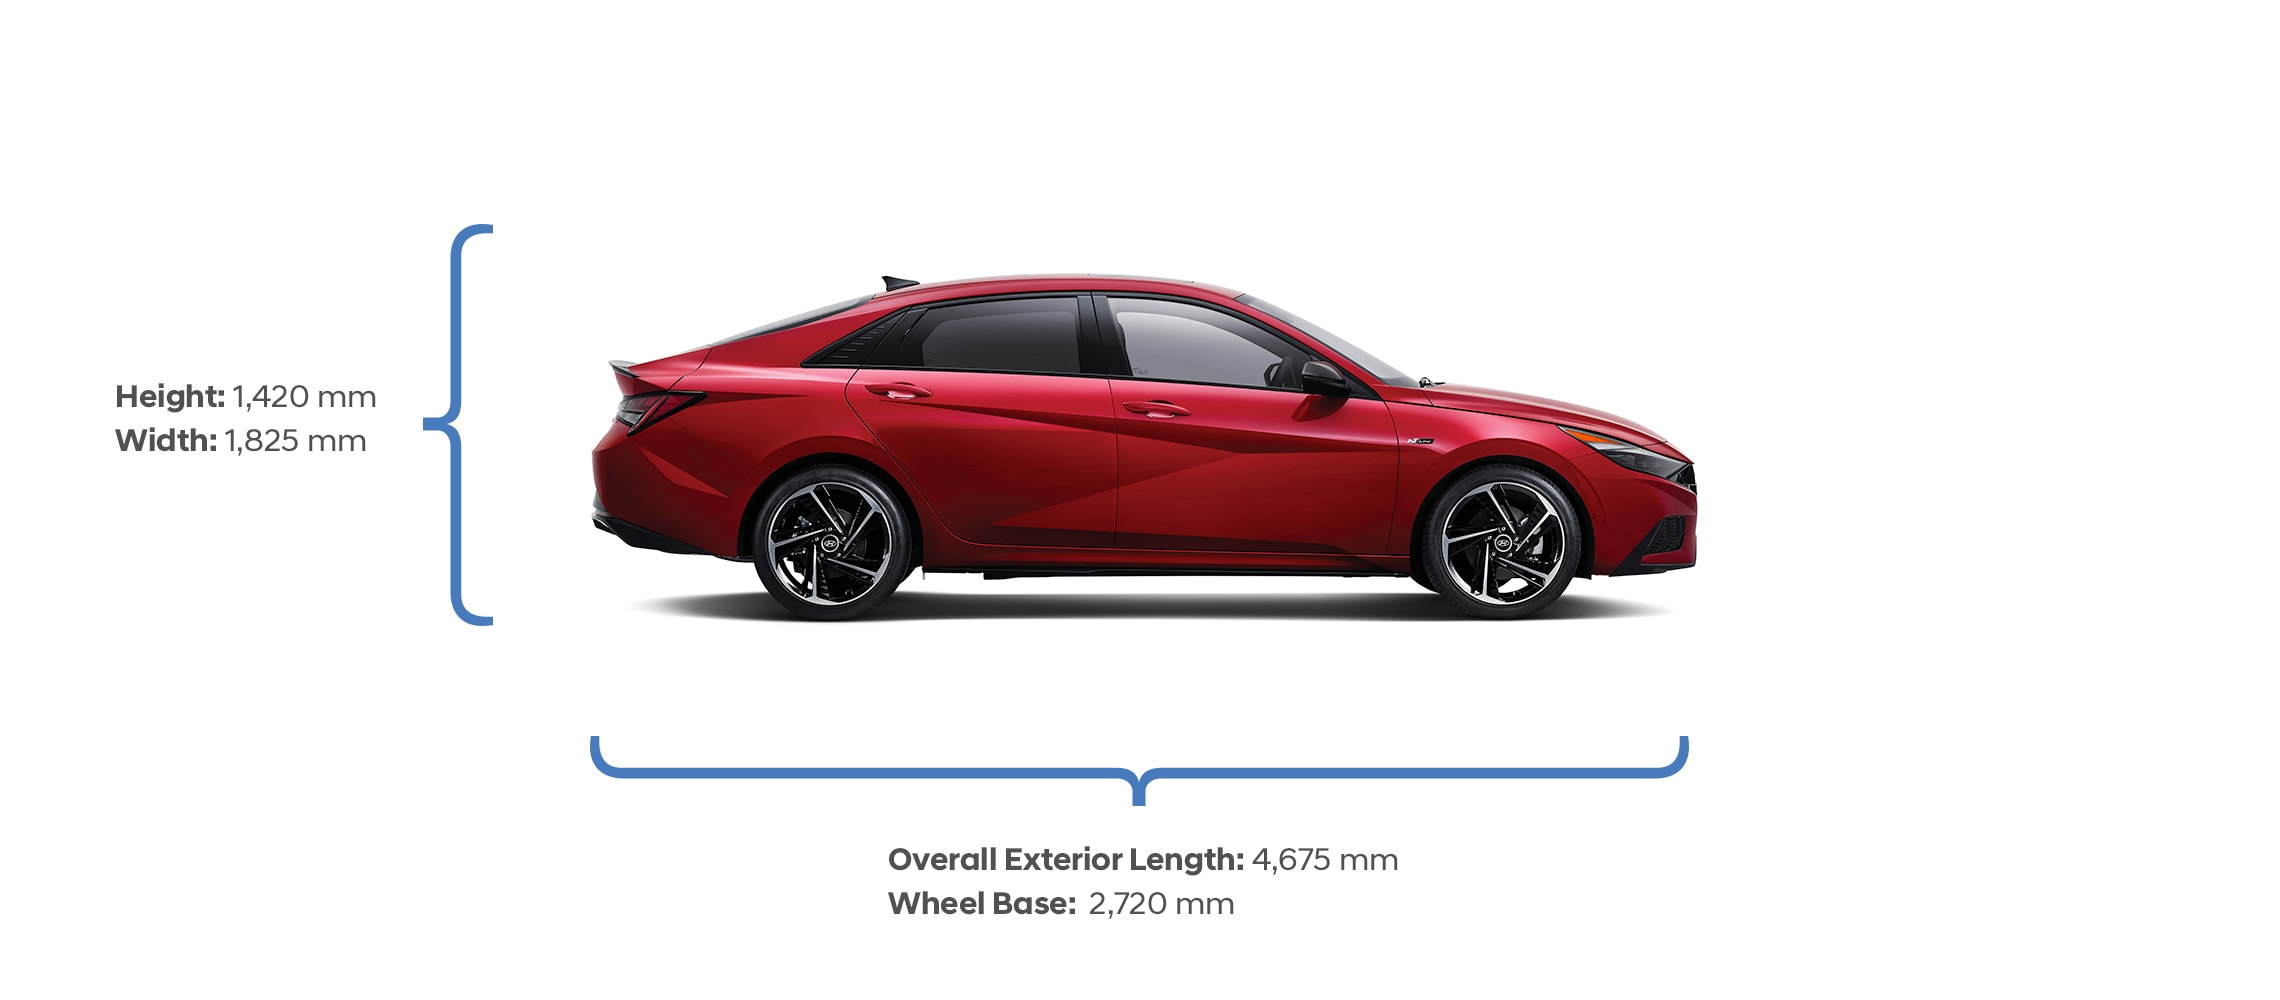 Height and width specifications of the 2021 Elantra N Line